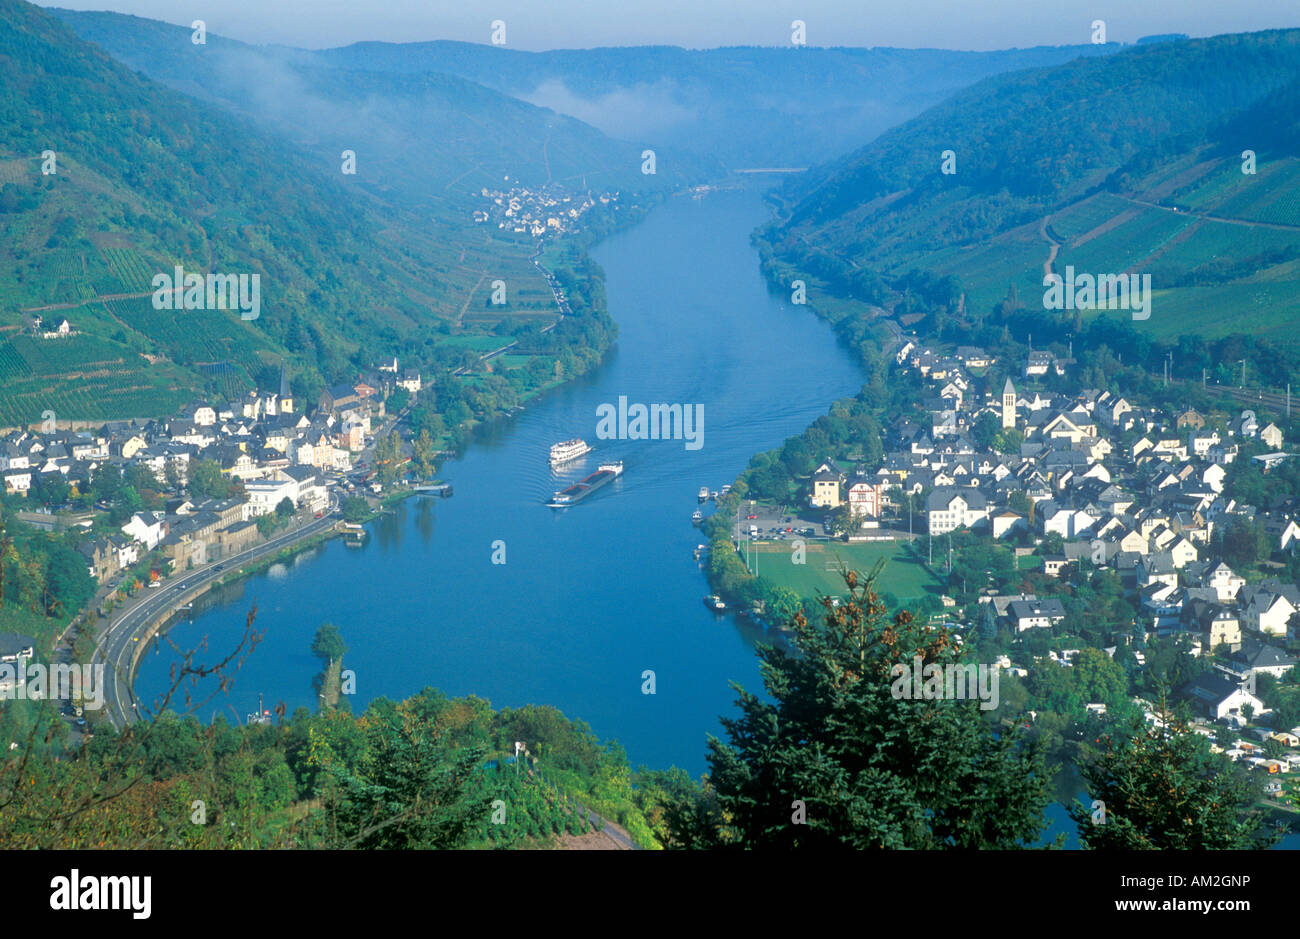 panoramic view of the River Moselle Valley in Germany with the towns Alf (left) and Bullay (right) Stock Photo